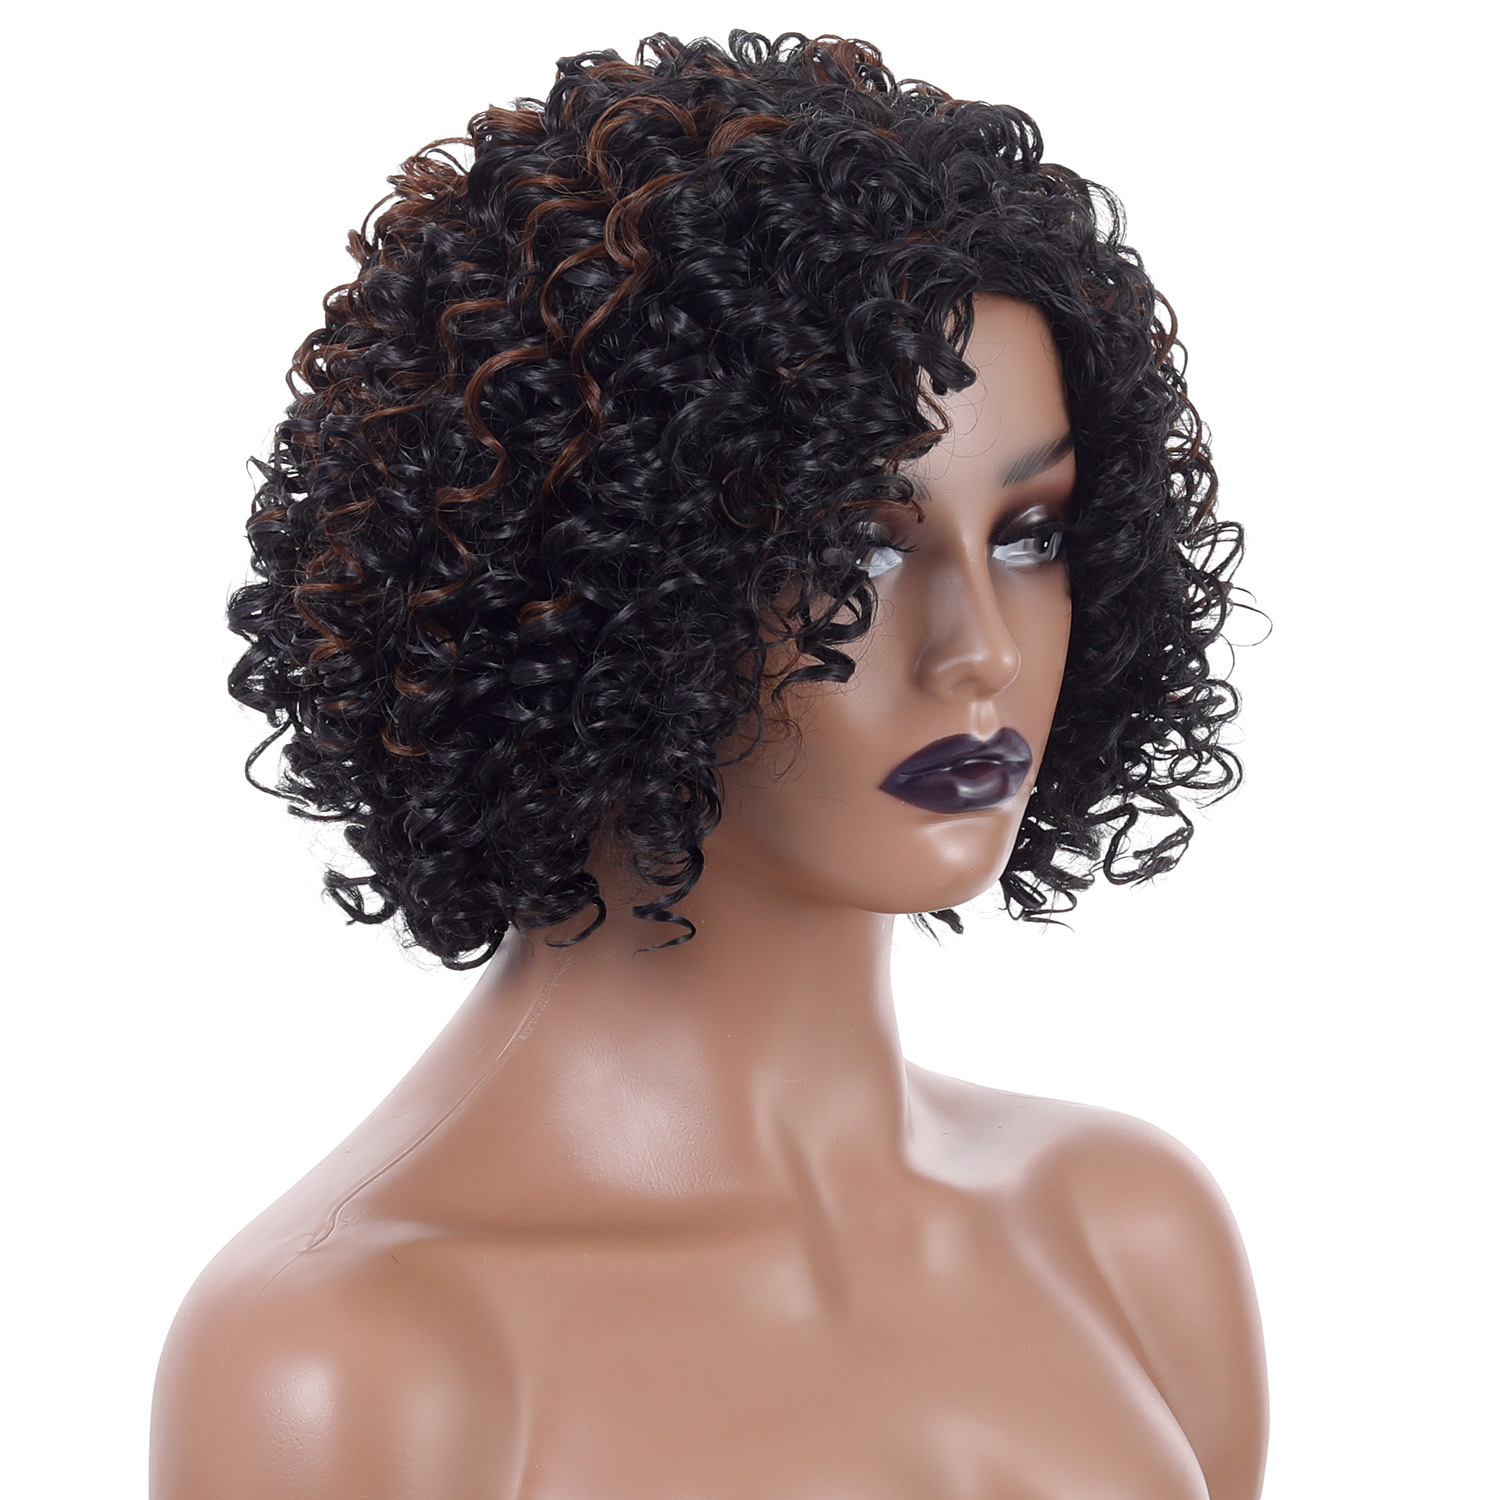 Chic black highlight brown synthetic wig with short curly hair, designed with women's afro small curly wig headgear